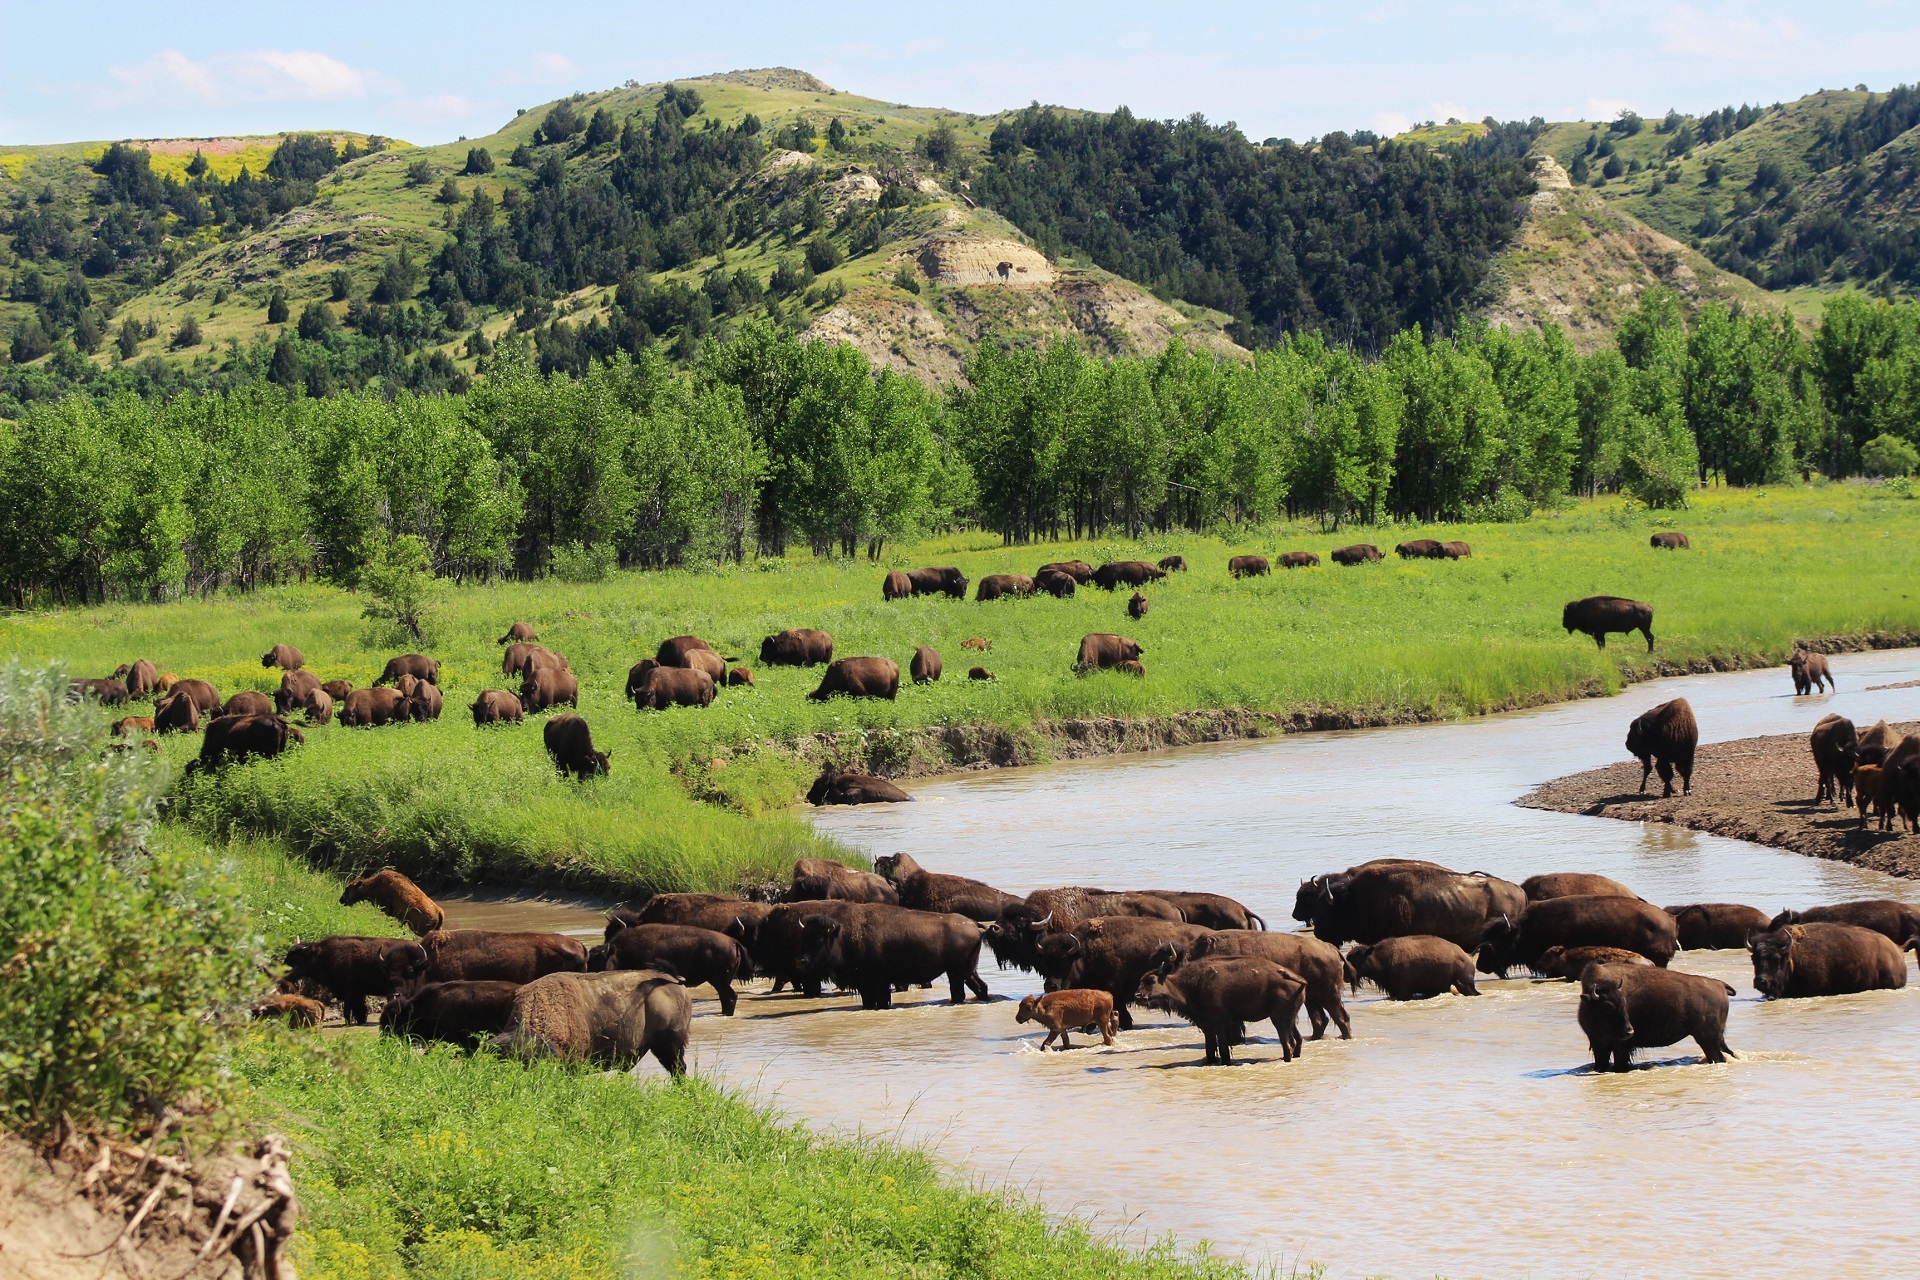 American bison crossing a river by skeeze